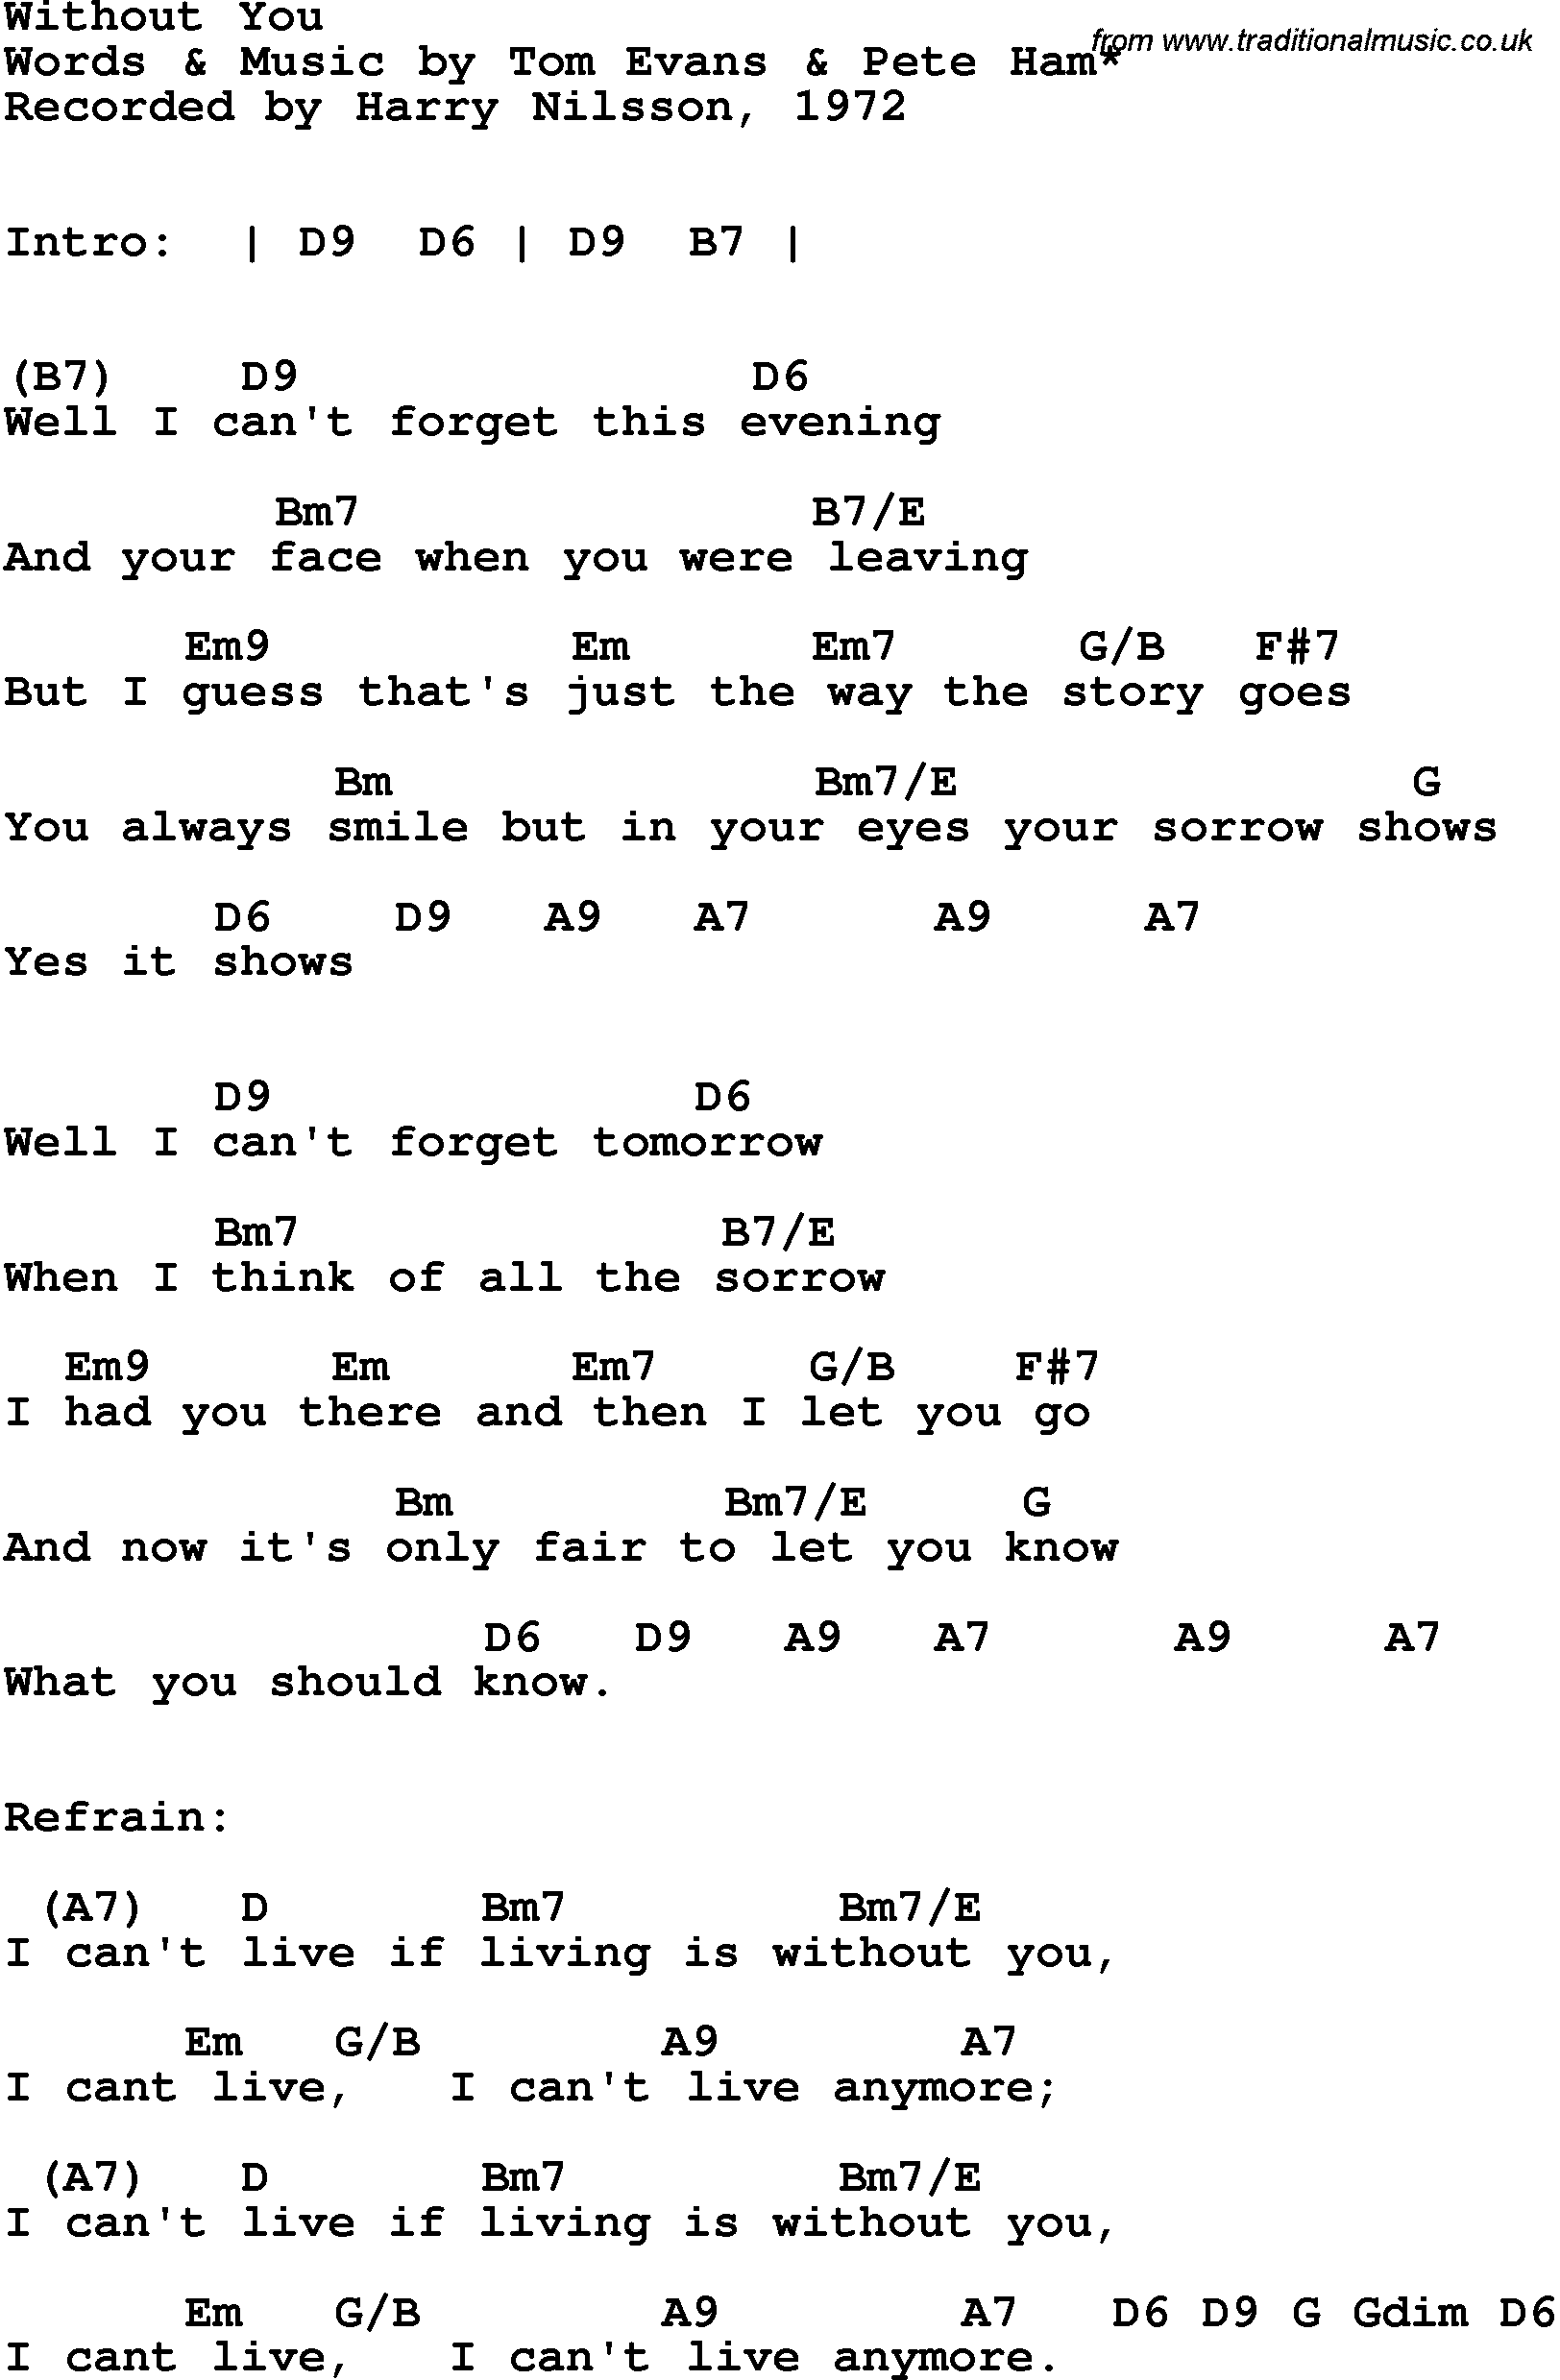 Song Lyrics with guitar chords for Without You - Harry Nillson, 1972